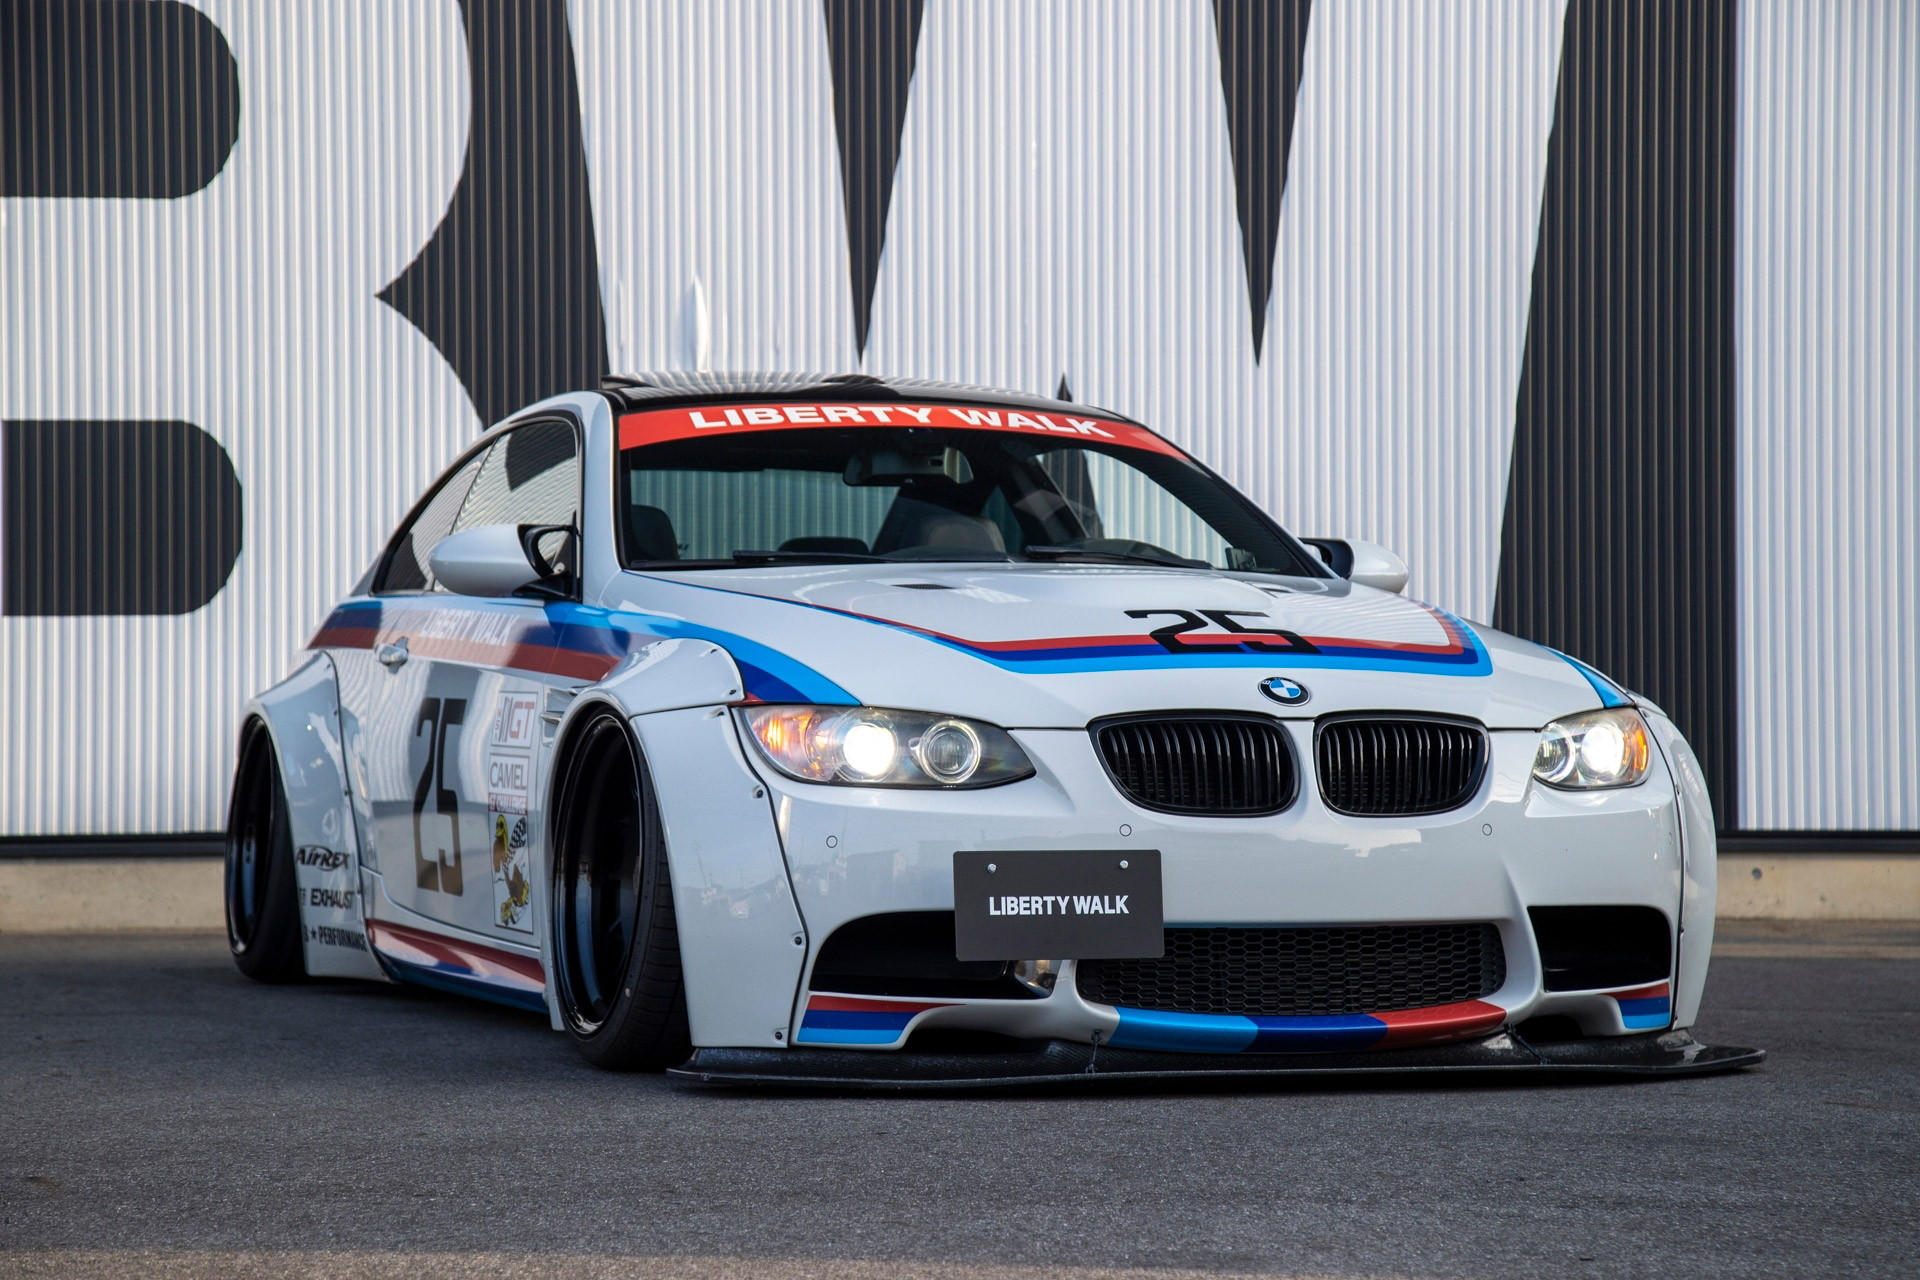 E92 BMW M3 Wants To Be a Racer, Tuner Gaslights It and Lists It